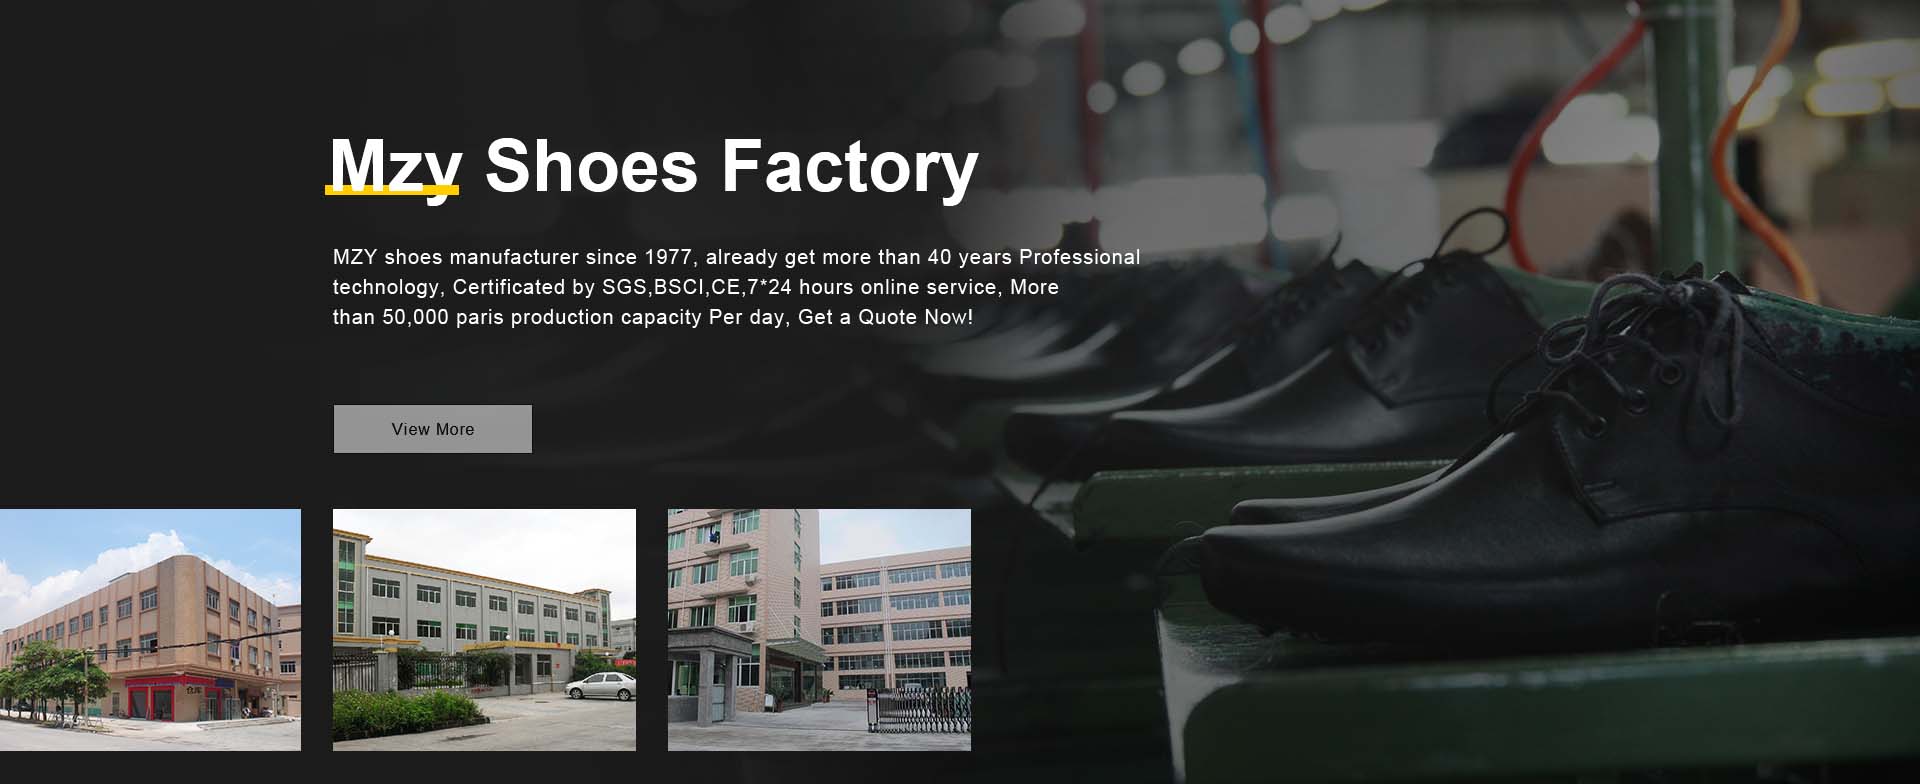 Mzy Shoes Factory